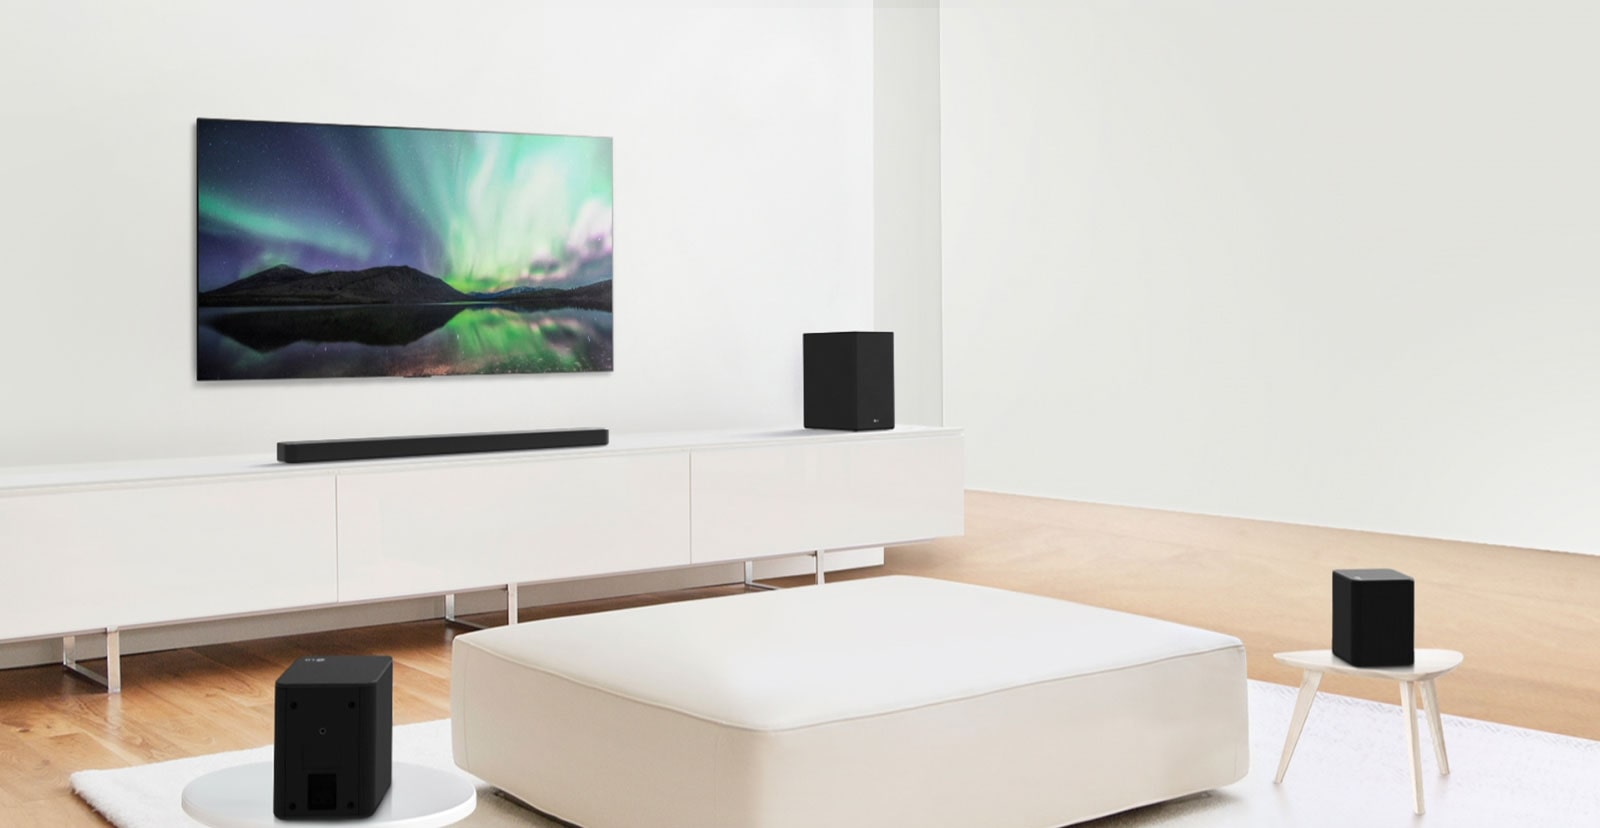 Video preview showing LG Soundbar in a white living room with 5.1.2 channel setup.